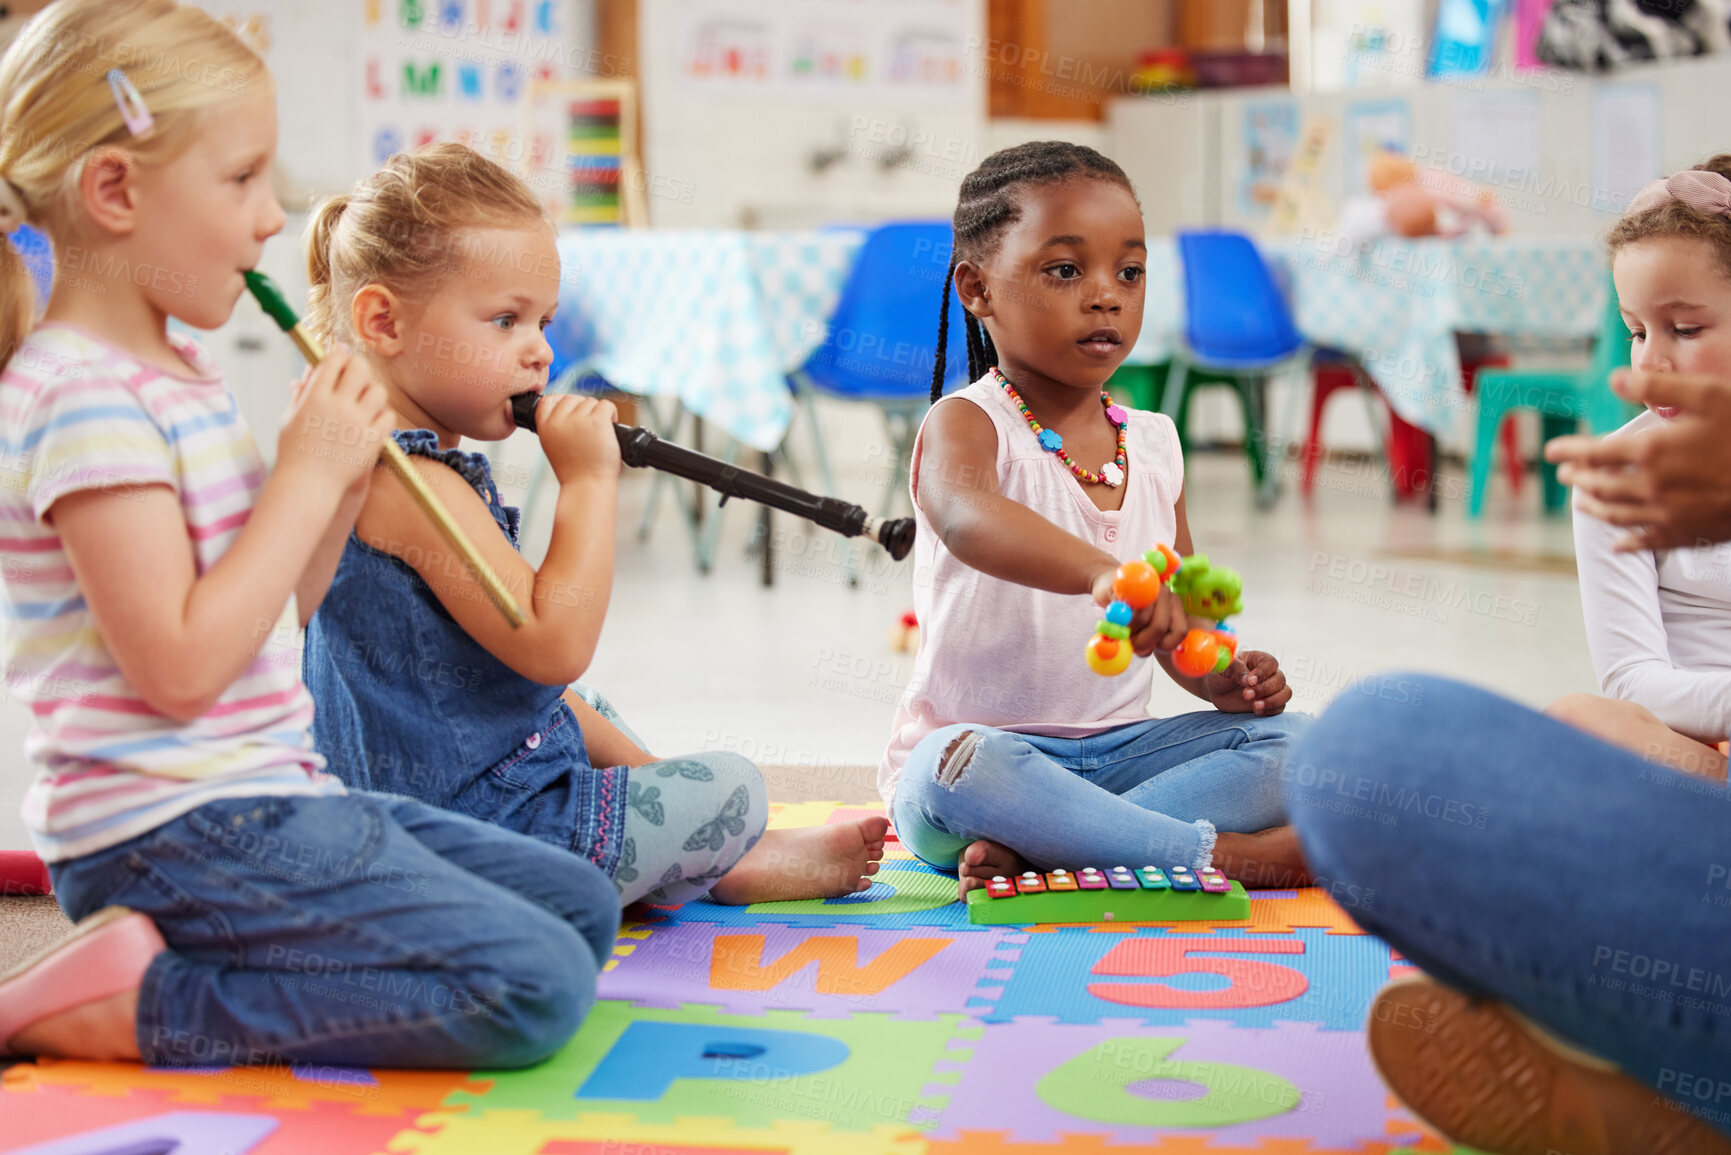 Buy stock photo Shot of children learning about musical instruments in class